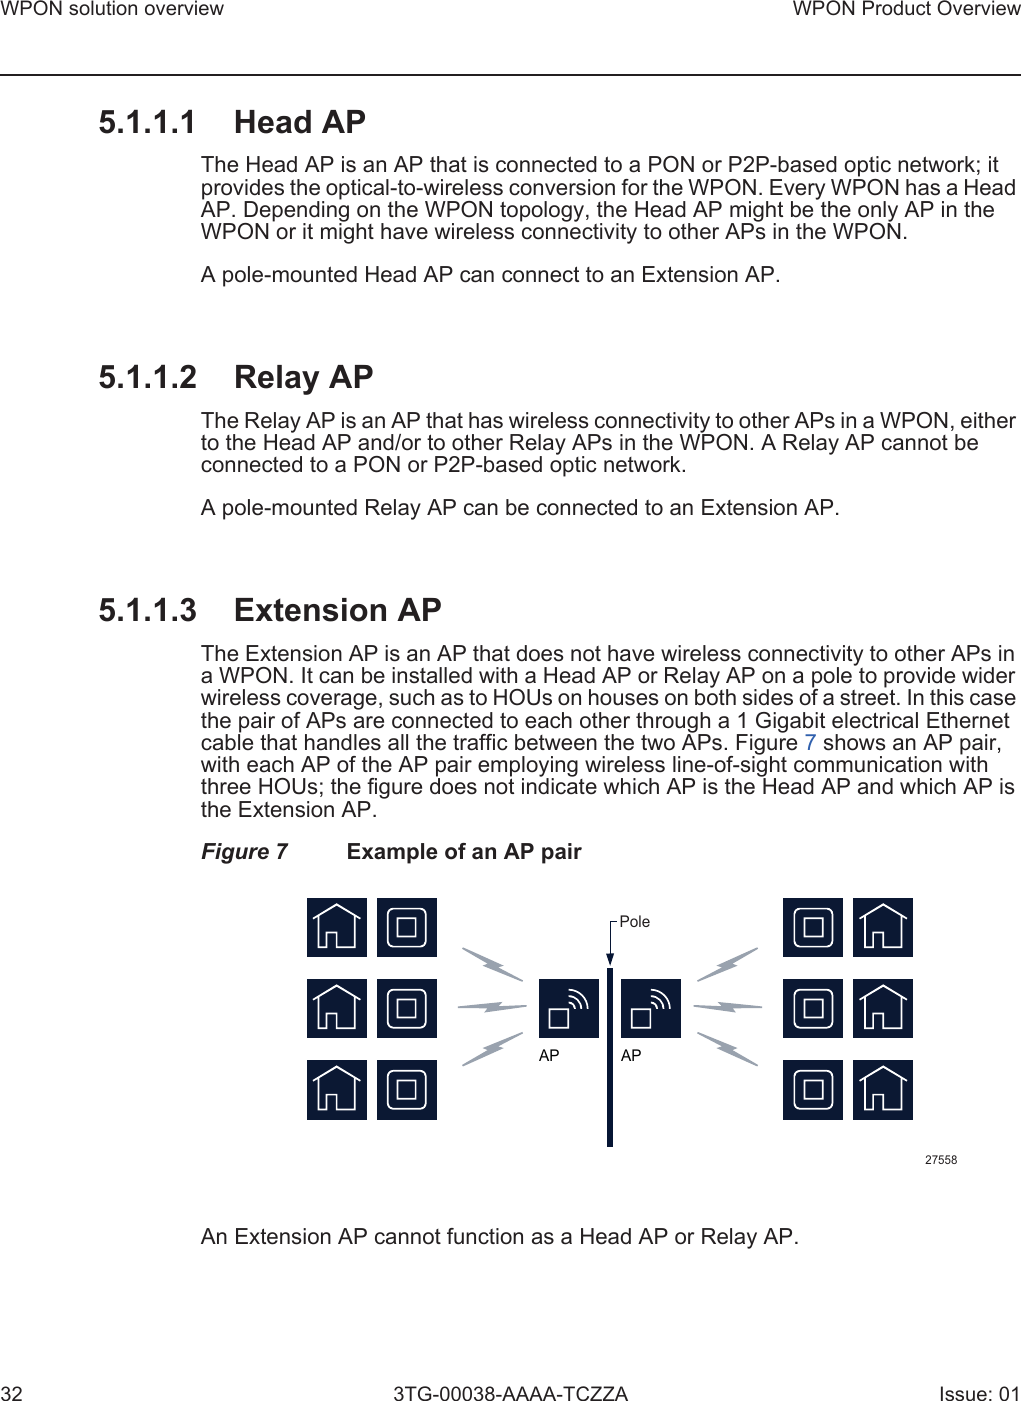 WPON solution overview32WPON Product Overview3TG-00038-AAAA-TCZZA Issue: 015.1.1.1 Head APThe Head AP is an AP that is connected to a PON or P2P-based optic network; it provides the optical-to-wireless conversion for the WPON. Every WPON has a Head AP. Depending on the WPON topology, the Head AP might be the only AP in the WPON or it might have wireless connectivity to other APs in the WPON. A pole-mounted Head AP can connect to an Extension AP.5.1.1.2 Relay APThe Relay AP is an AP that has wireless connectivity to other APs in a WPON, either to the Head AP and/or to other Relay APs in the WPON. A Relay AP cannot be connected to a PON or P2P-based optic network. A pole-mounted Relay AP can be connected to an Extension AP.5.1.1.3 Extension APThe Extension AP is an AP that does not have wireless connectivity to other APs in a WPON. It can be installed with a Head AP or Relay AP on a pole to provide wider wireless coverage, such as to HOUs on houses on both sides of a street. In this case the pair of APs are connected to each other through a 1 Gigabit electrical Ethernet cable that handles all the traffic between the two APs. Figure 7 shows an AP pair, with each AP of the AP pair employing wireless line-of-sight communication with three HOUs; the figure does not indicate which AP is the Head AP and which AP is the Extension AP.Figure 7 Example of an AP pairAn Extension AP cannot function as a Head AP or Relay AP.27558PoleAP AP